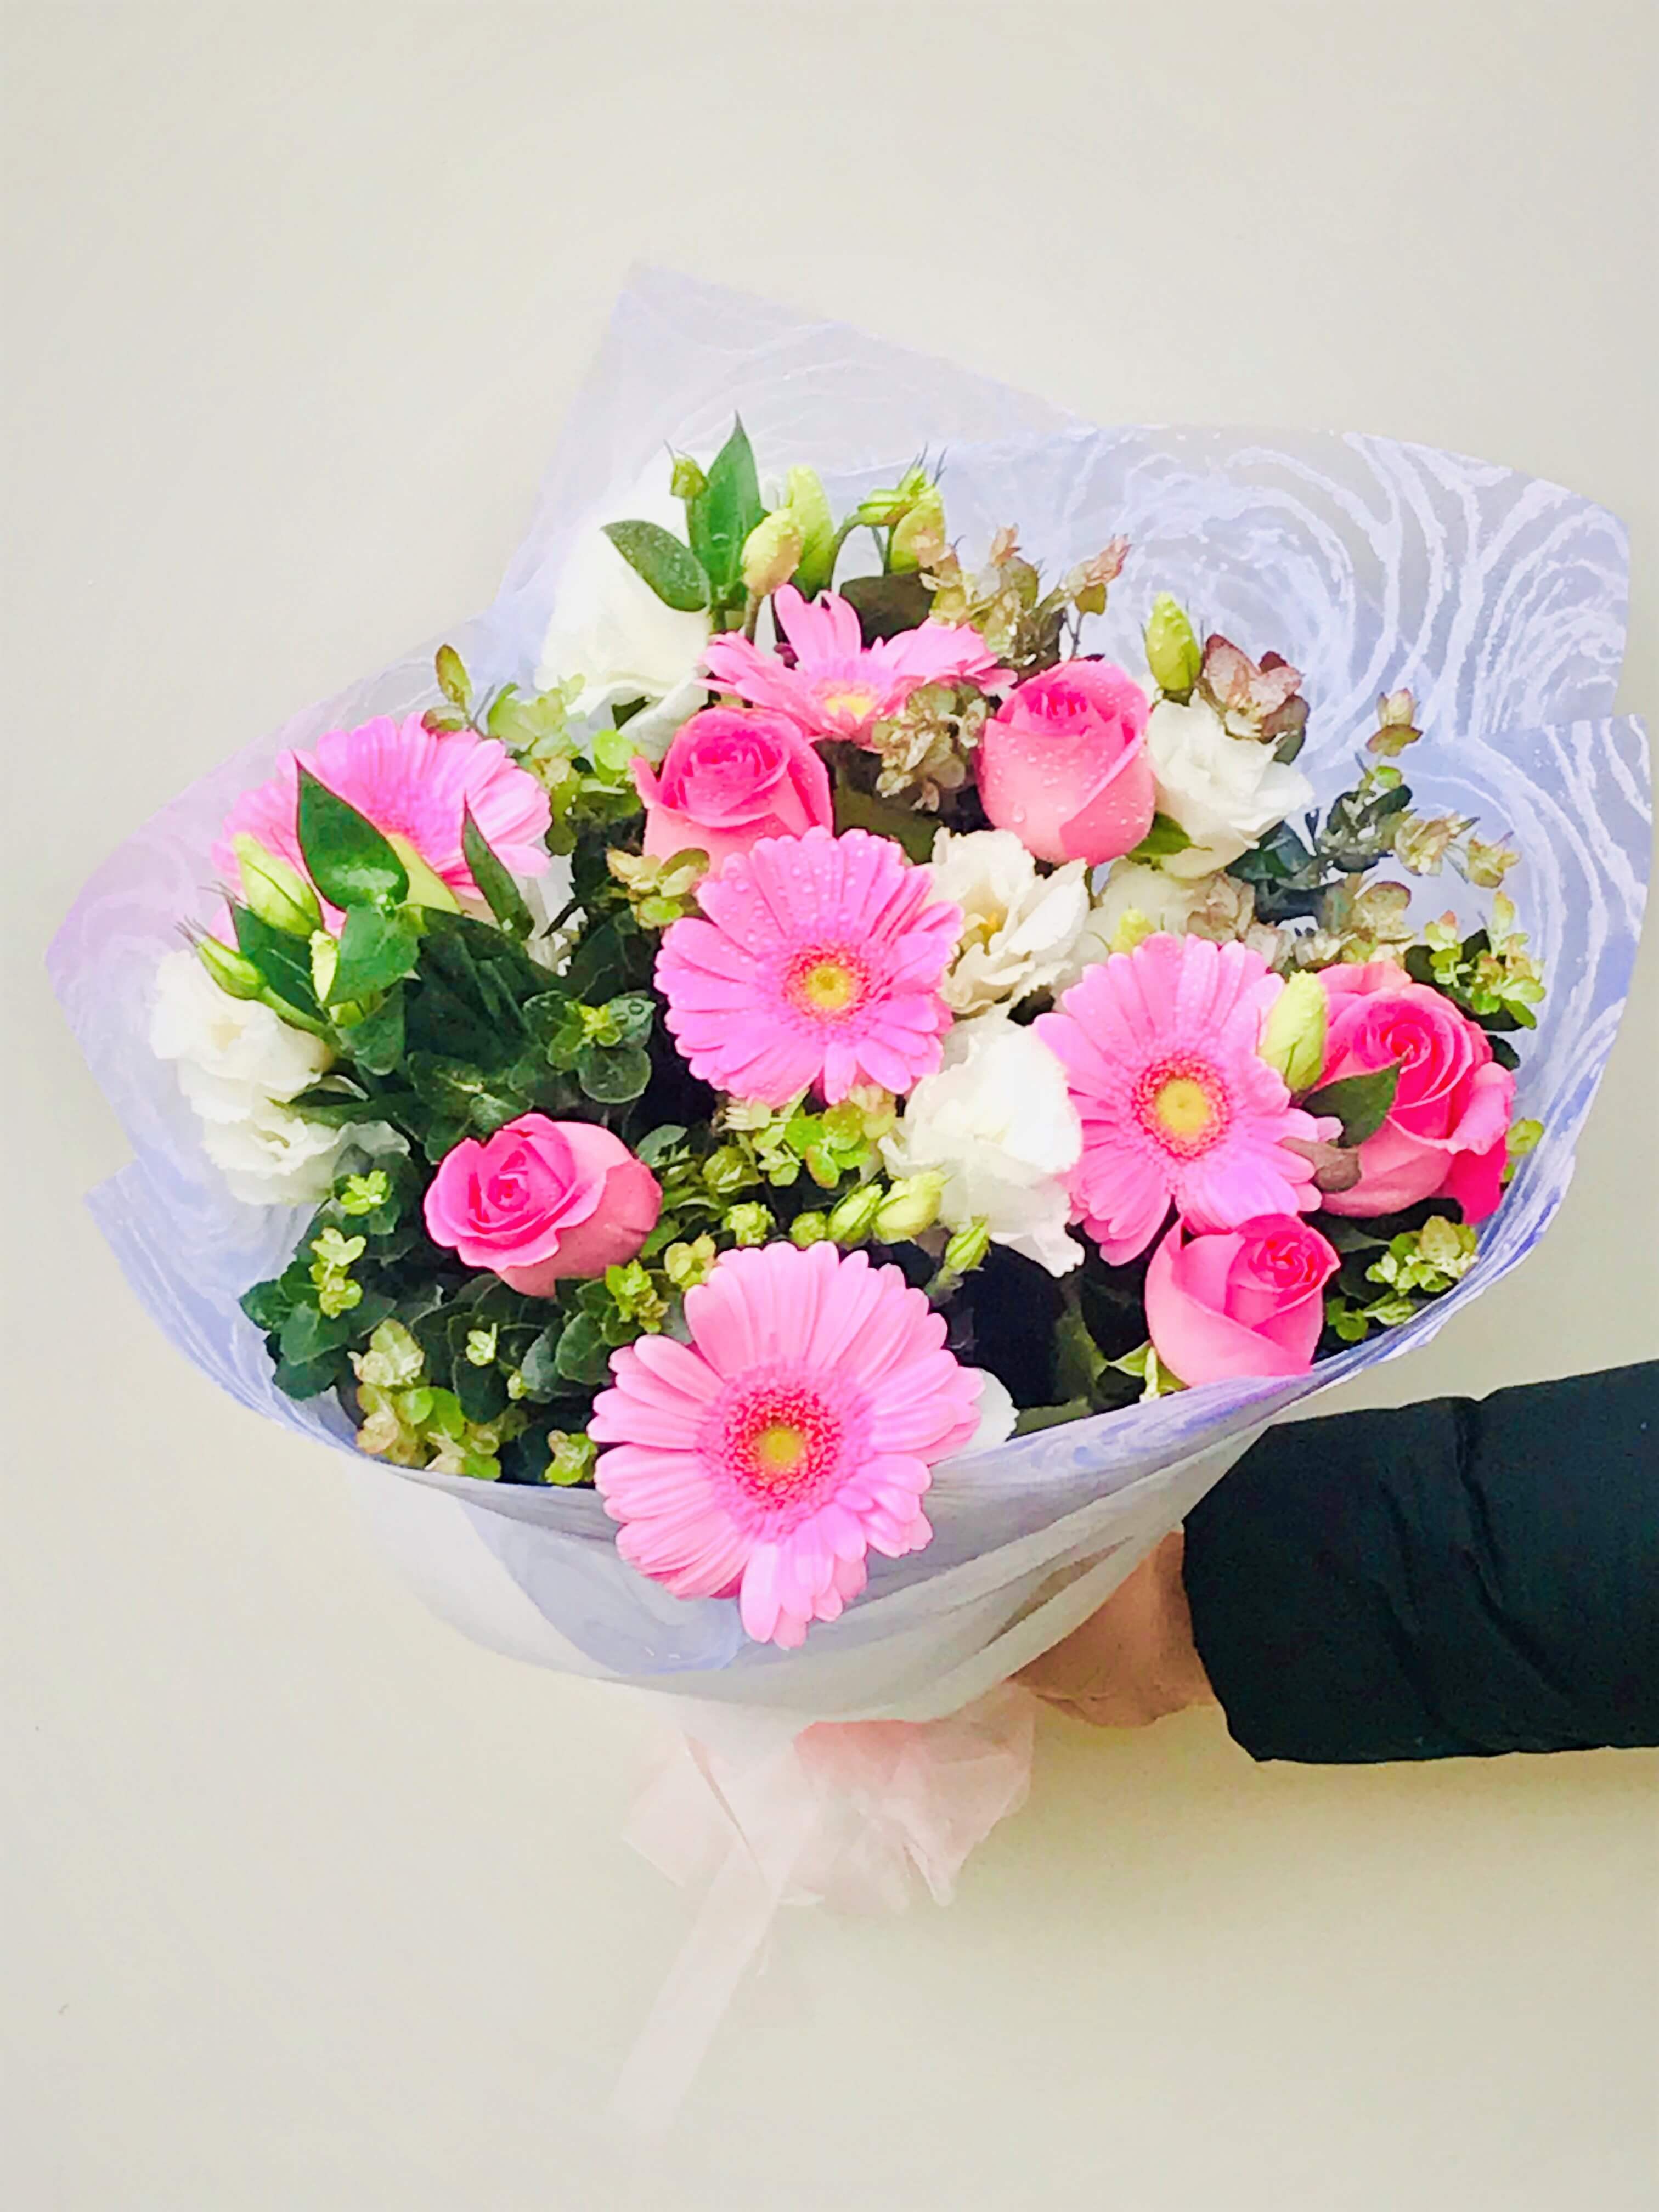 Lovely Smile - Mix Flower Bouquet